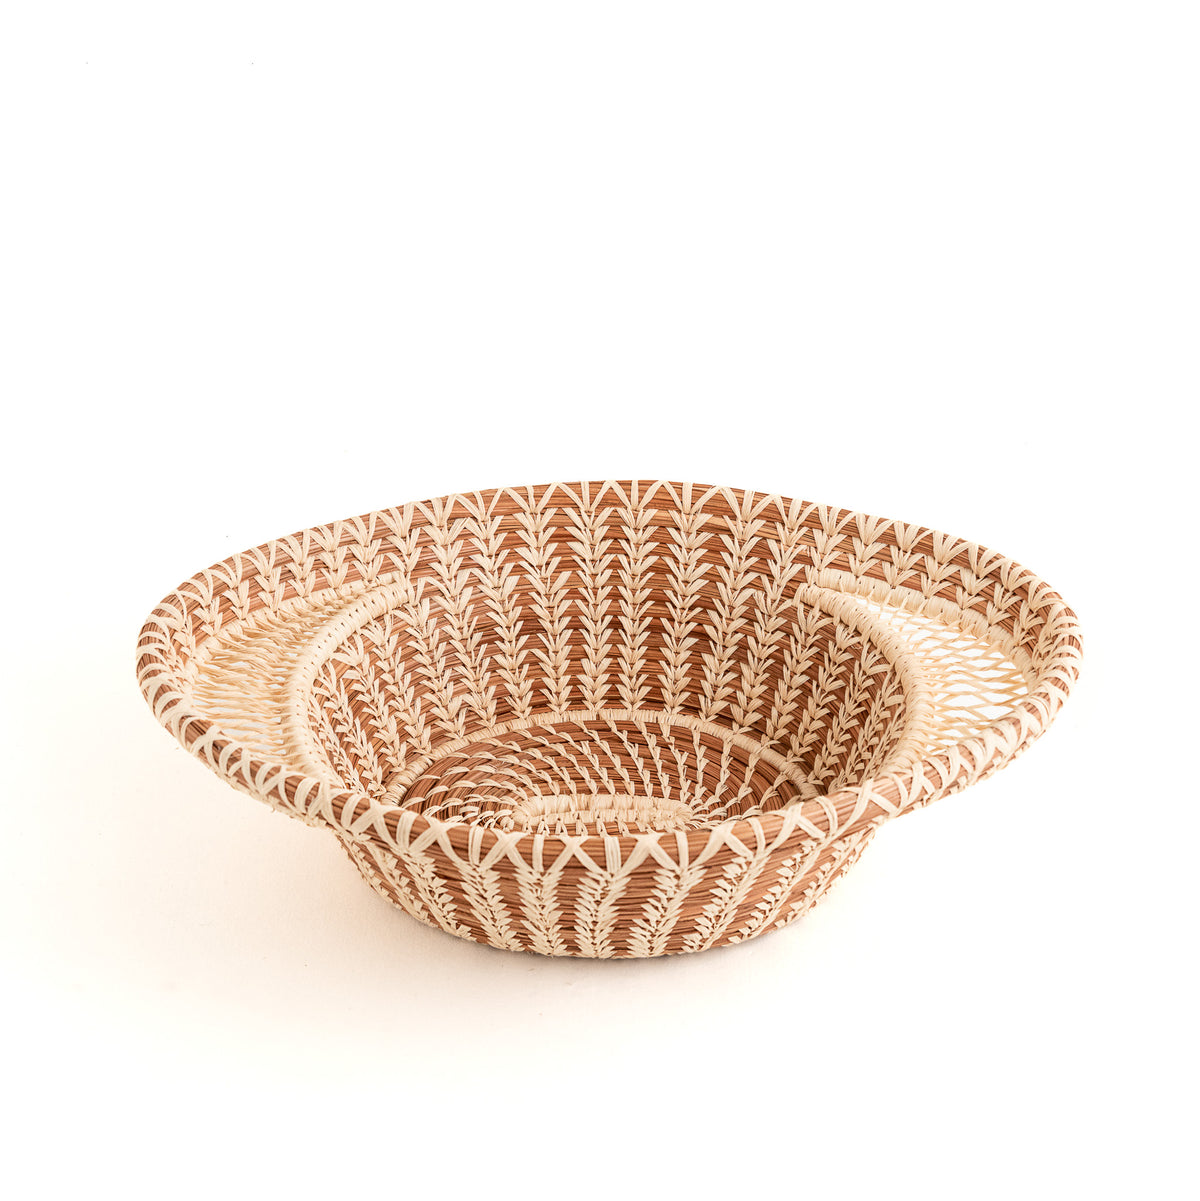 Pine Needle Basket with Lacy Handles